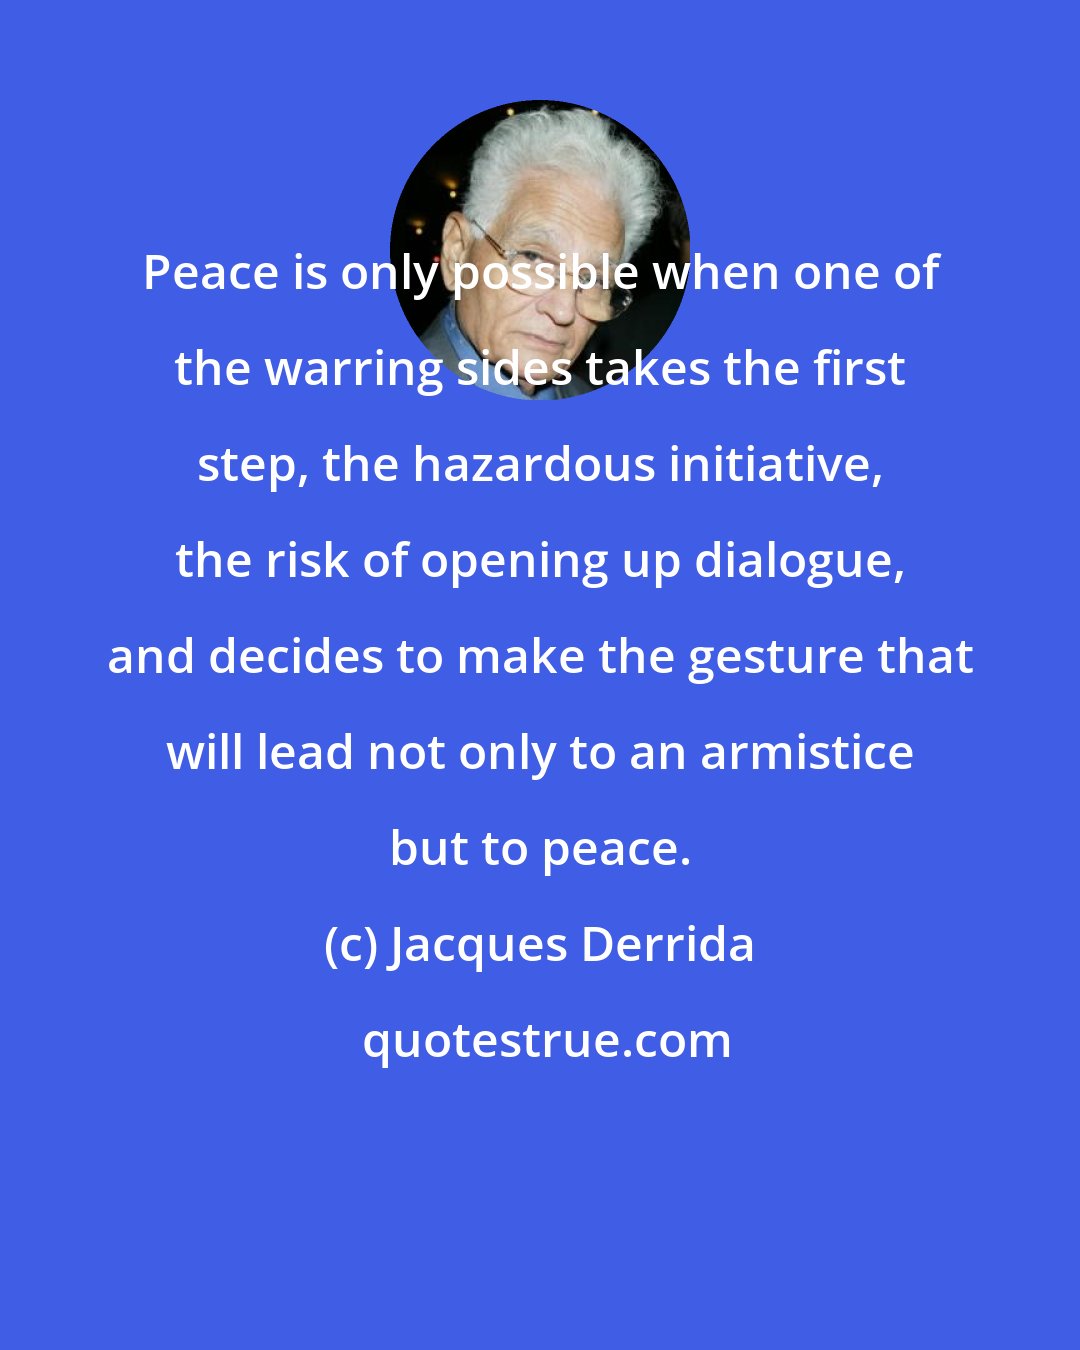 Jacques Derrida: Peace is only possible when one of the warring sides takes the first step, the hazardous initiative, the risk of opening up dialogue, and decides to make the gesture that will lead not only to an armistice but to peace.